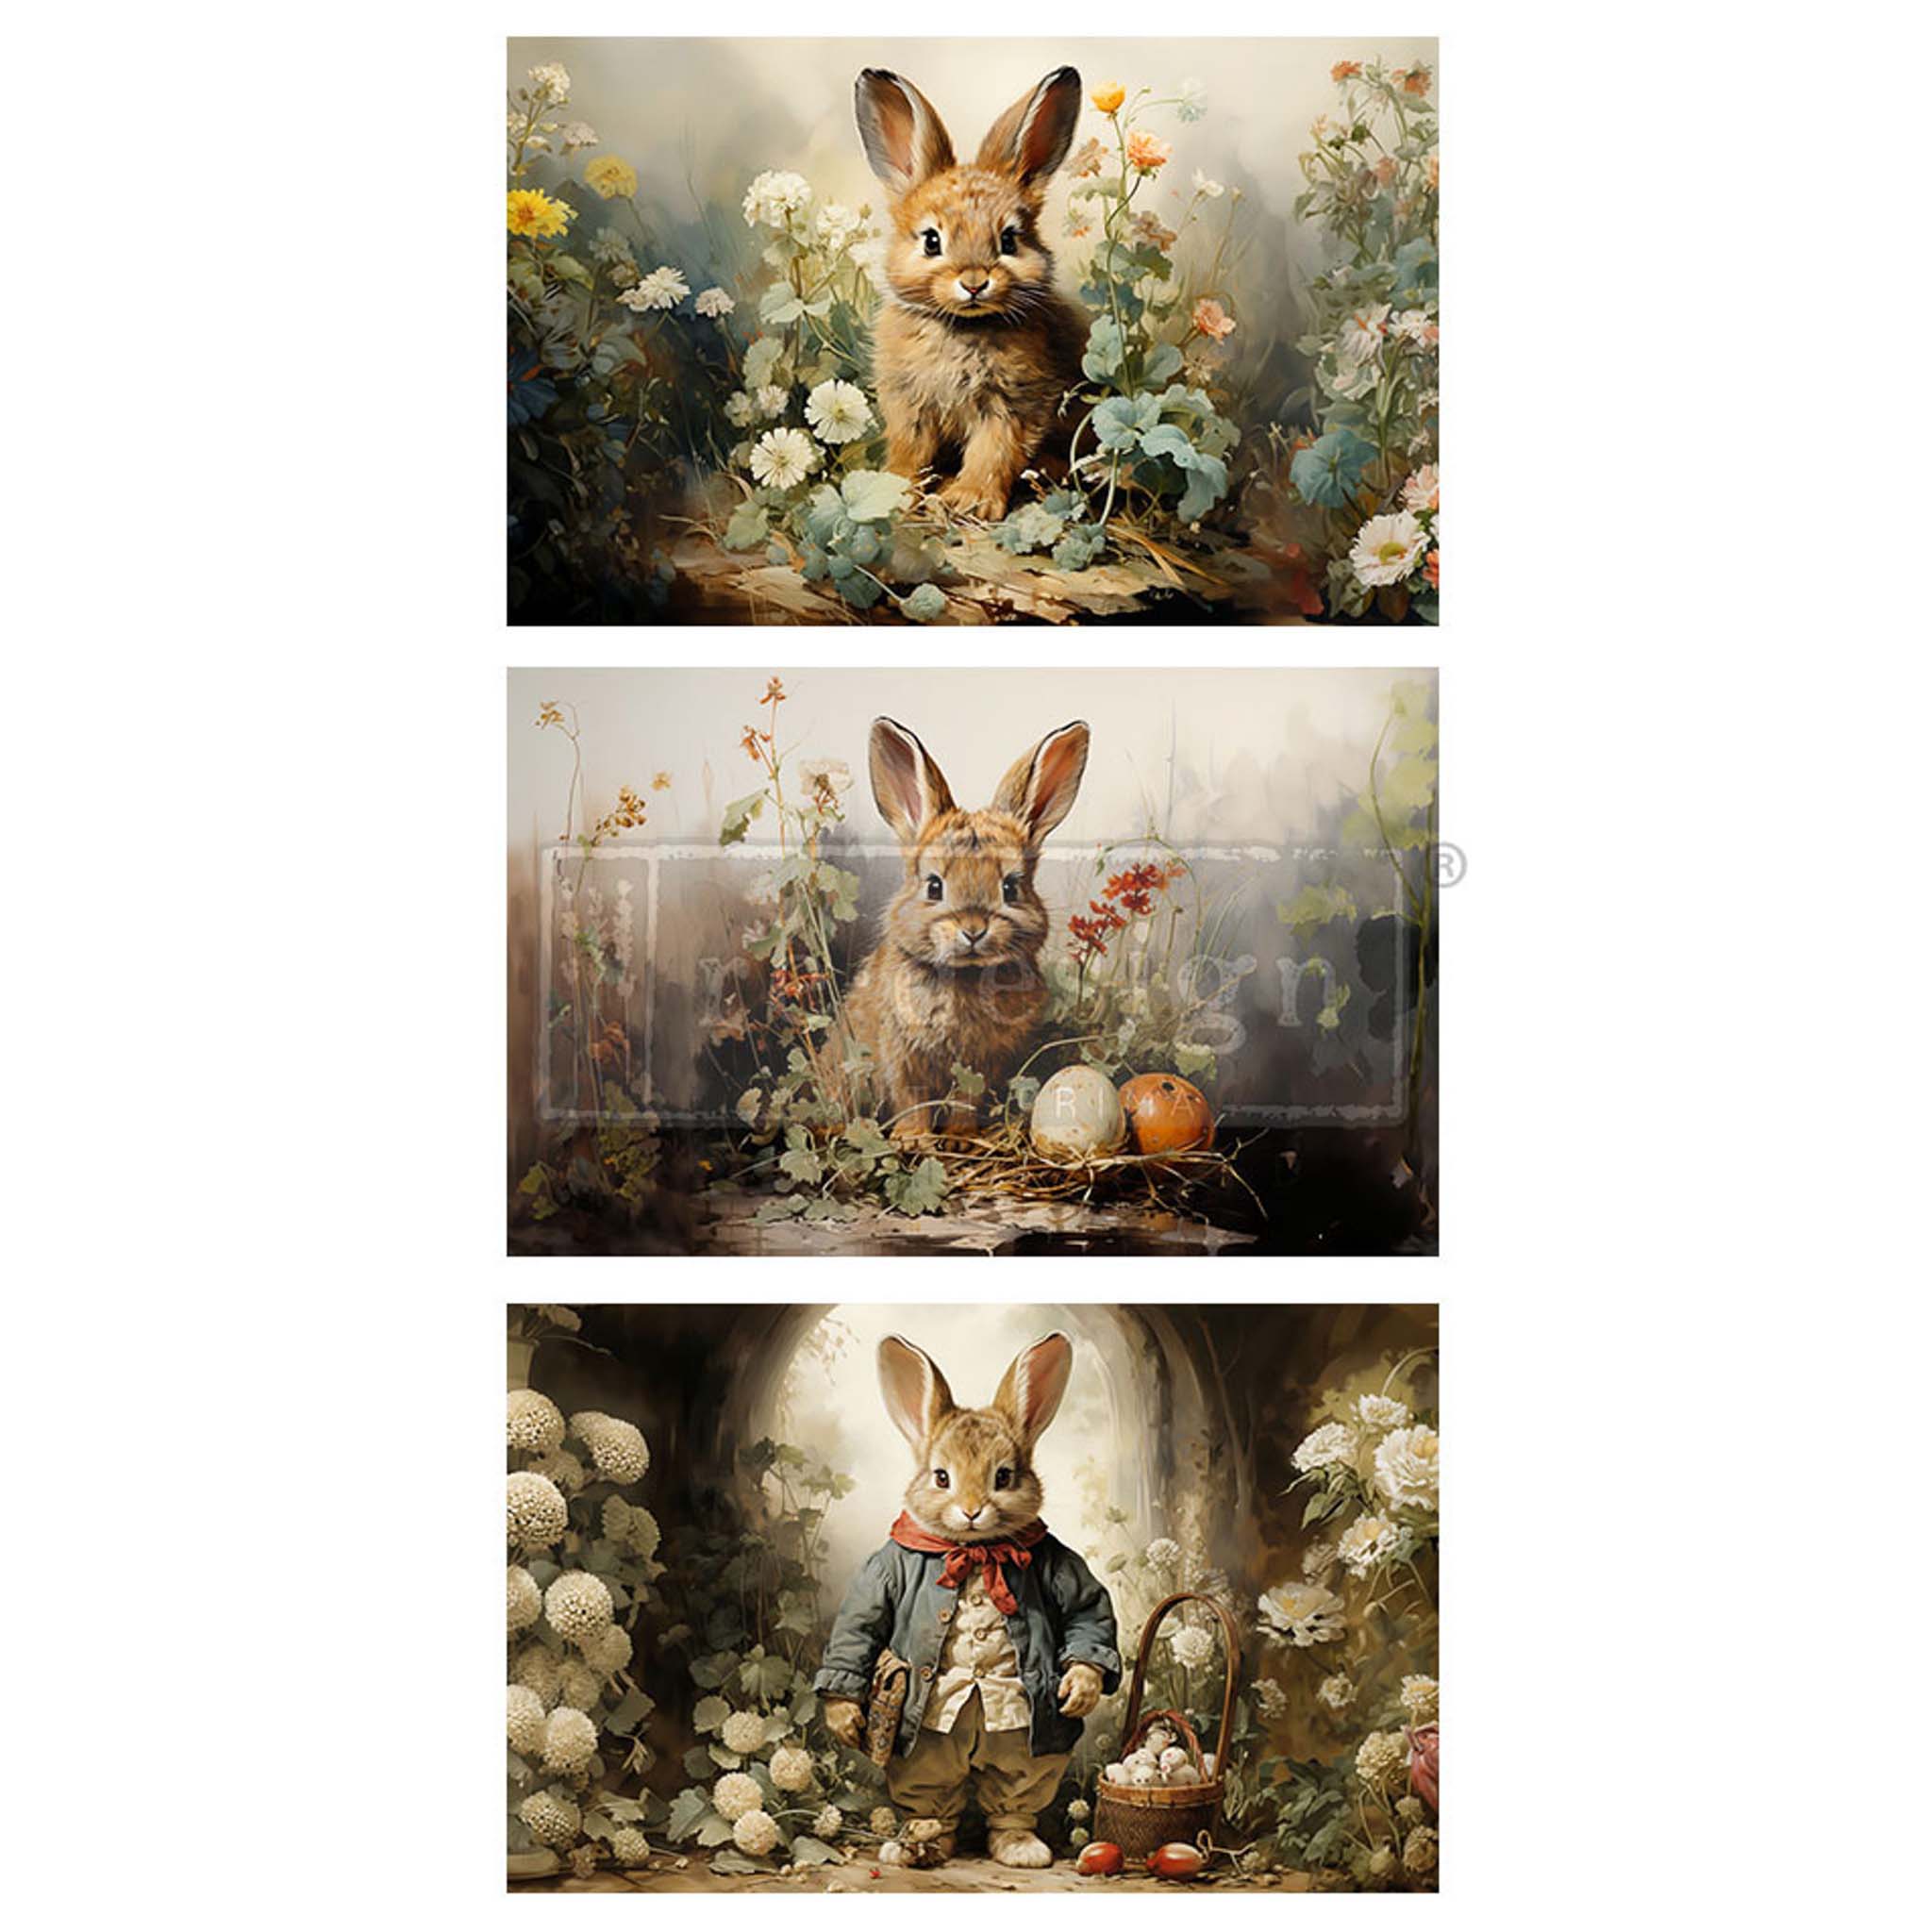 Three sheets of ReDesign with Prima's Dreamy Bunnies tissue paper, each featuring a sweet bunny surrounded by colorful flowers against a white background.